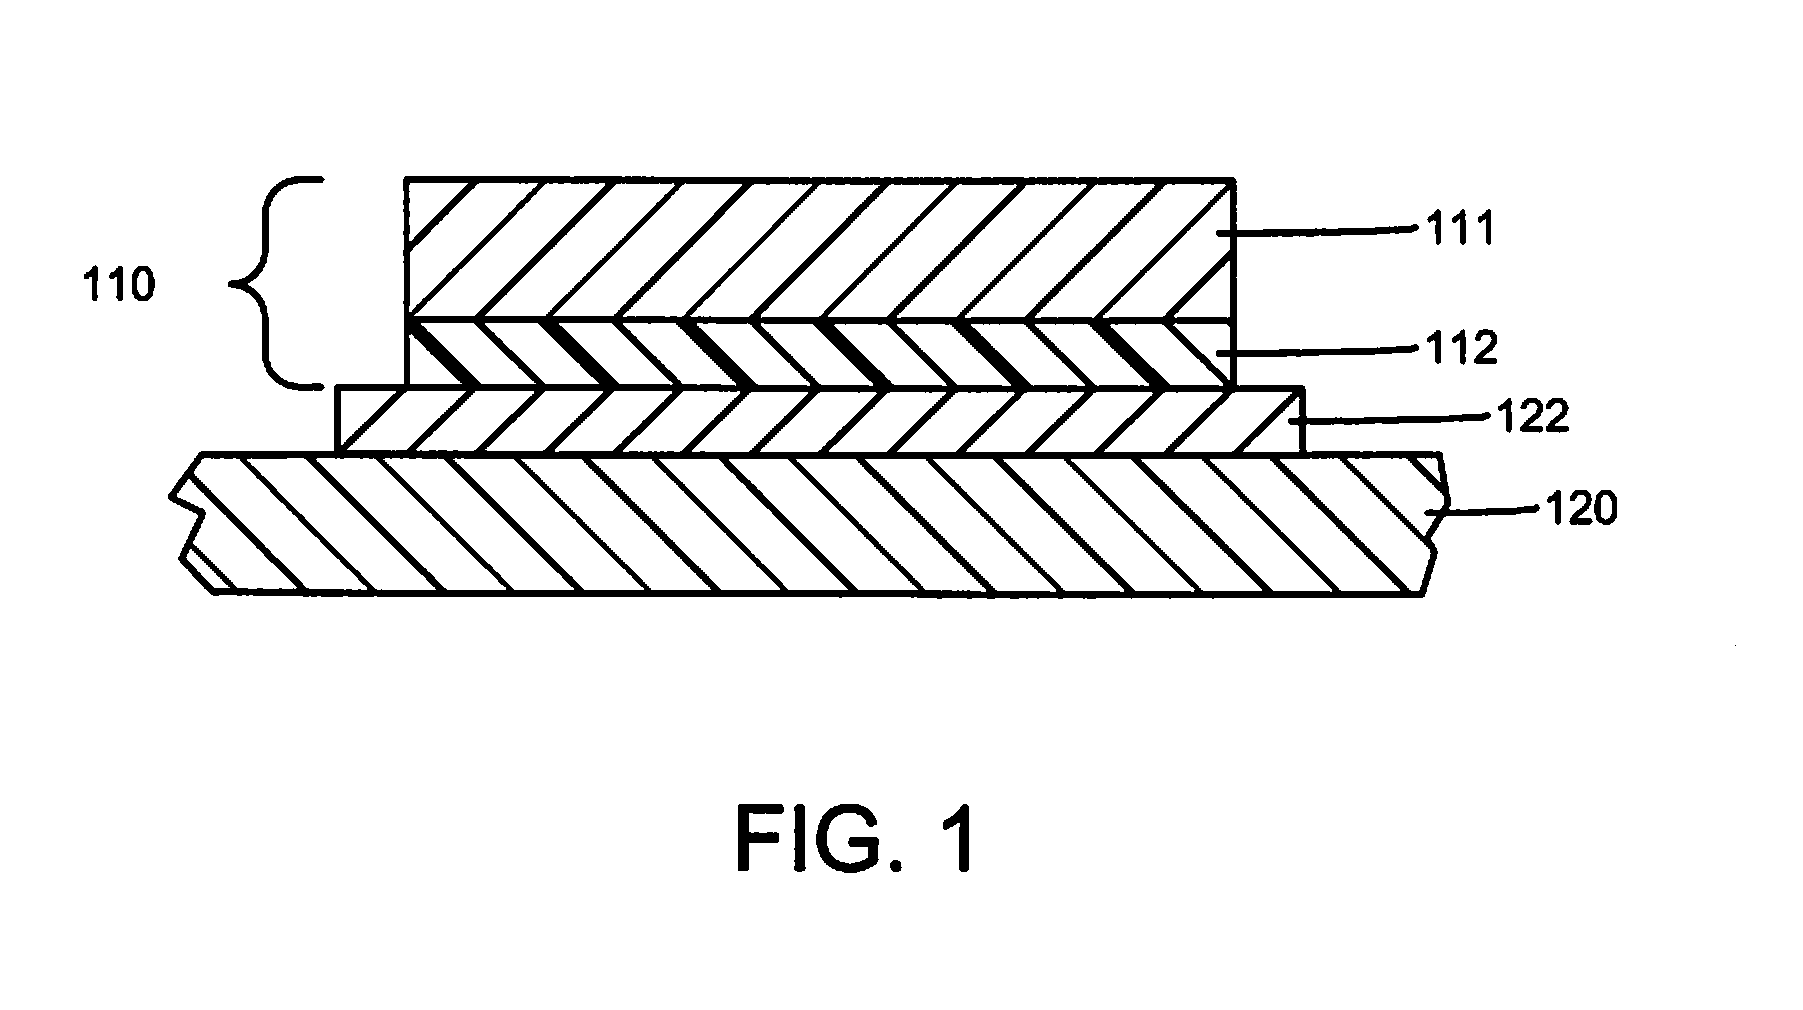 Apparatus and Method to Enable Easy Removal of One Substrate from Another for Enhanced Reworkability and Recyclability